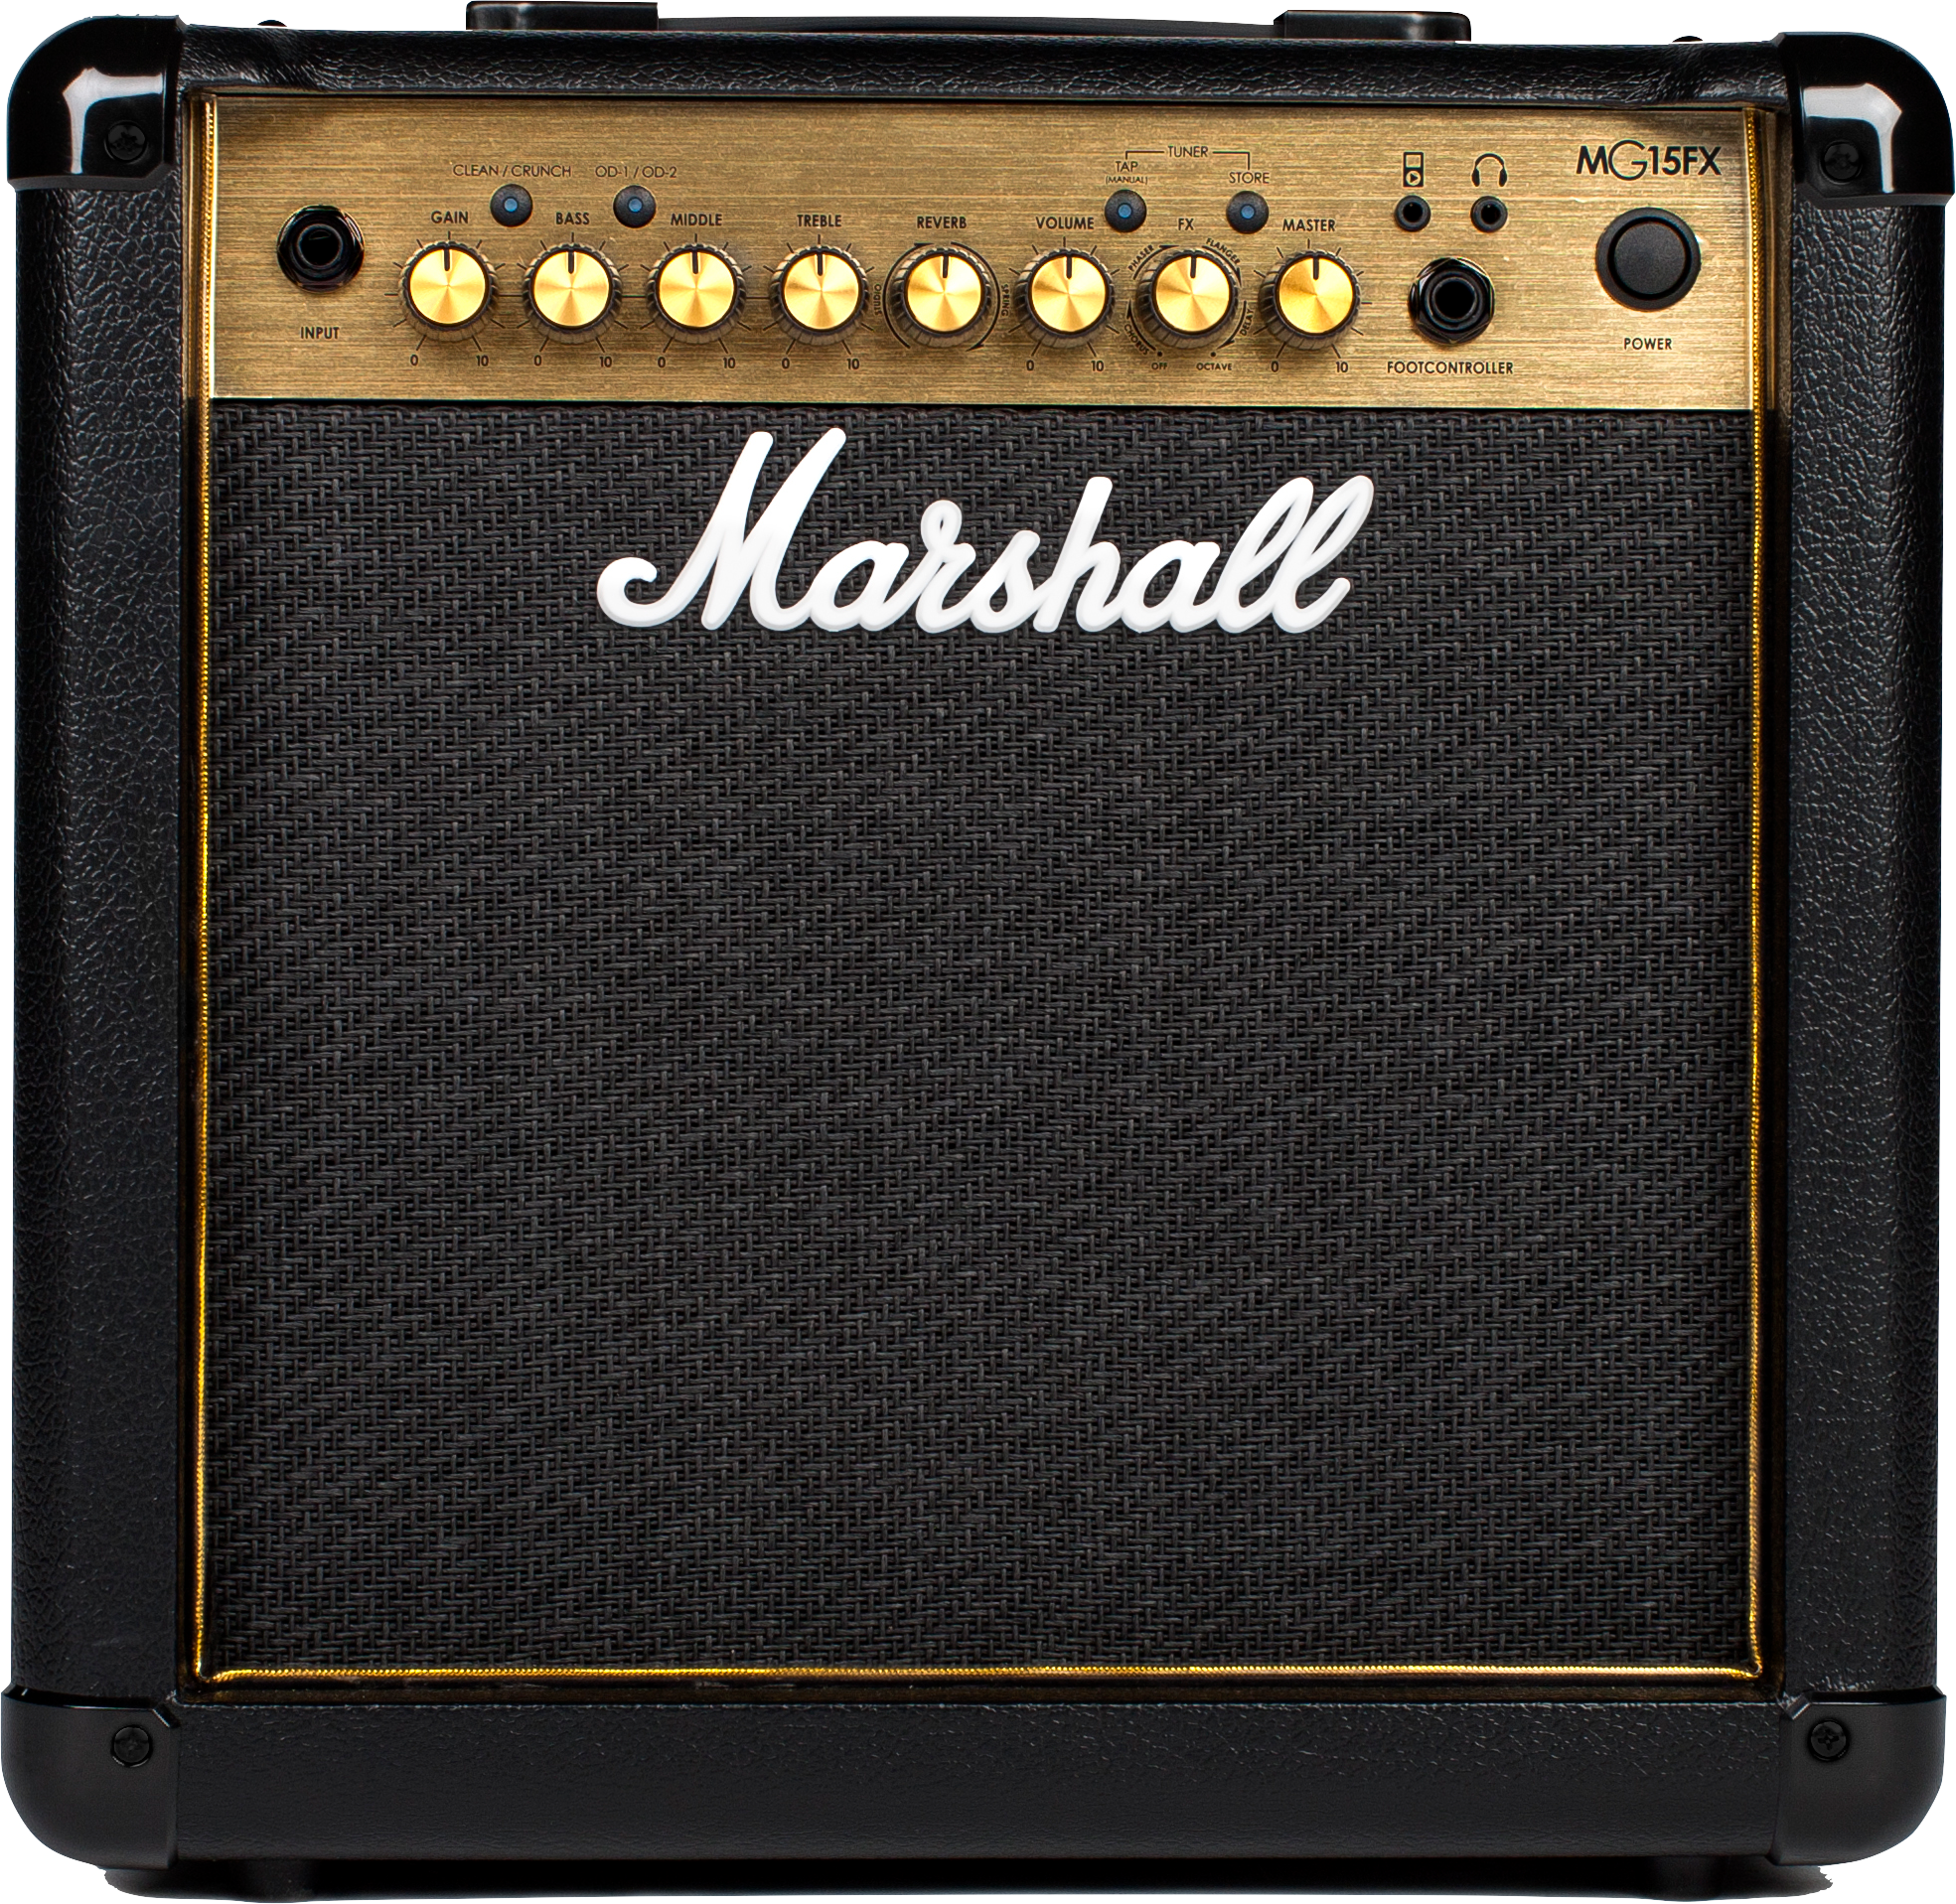 Marshall Mg15fx Mg Gold 15w 1x8 - Electric guitar combo amp - Variation 1